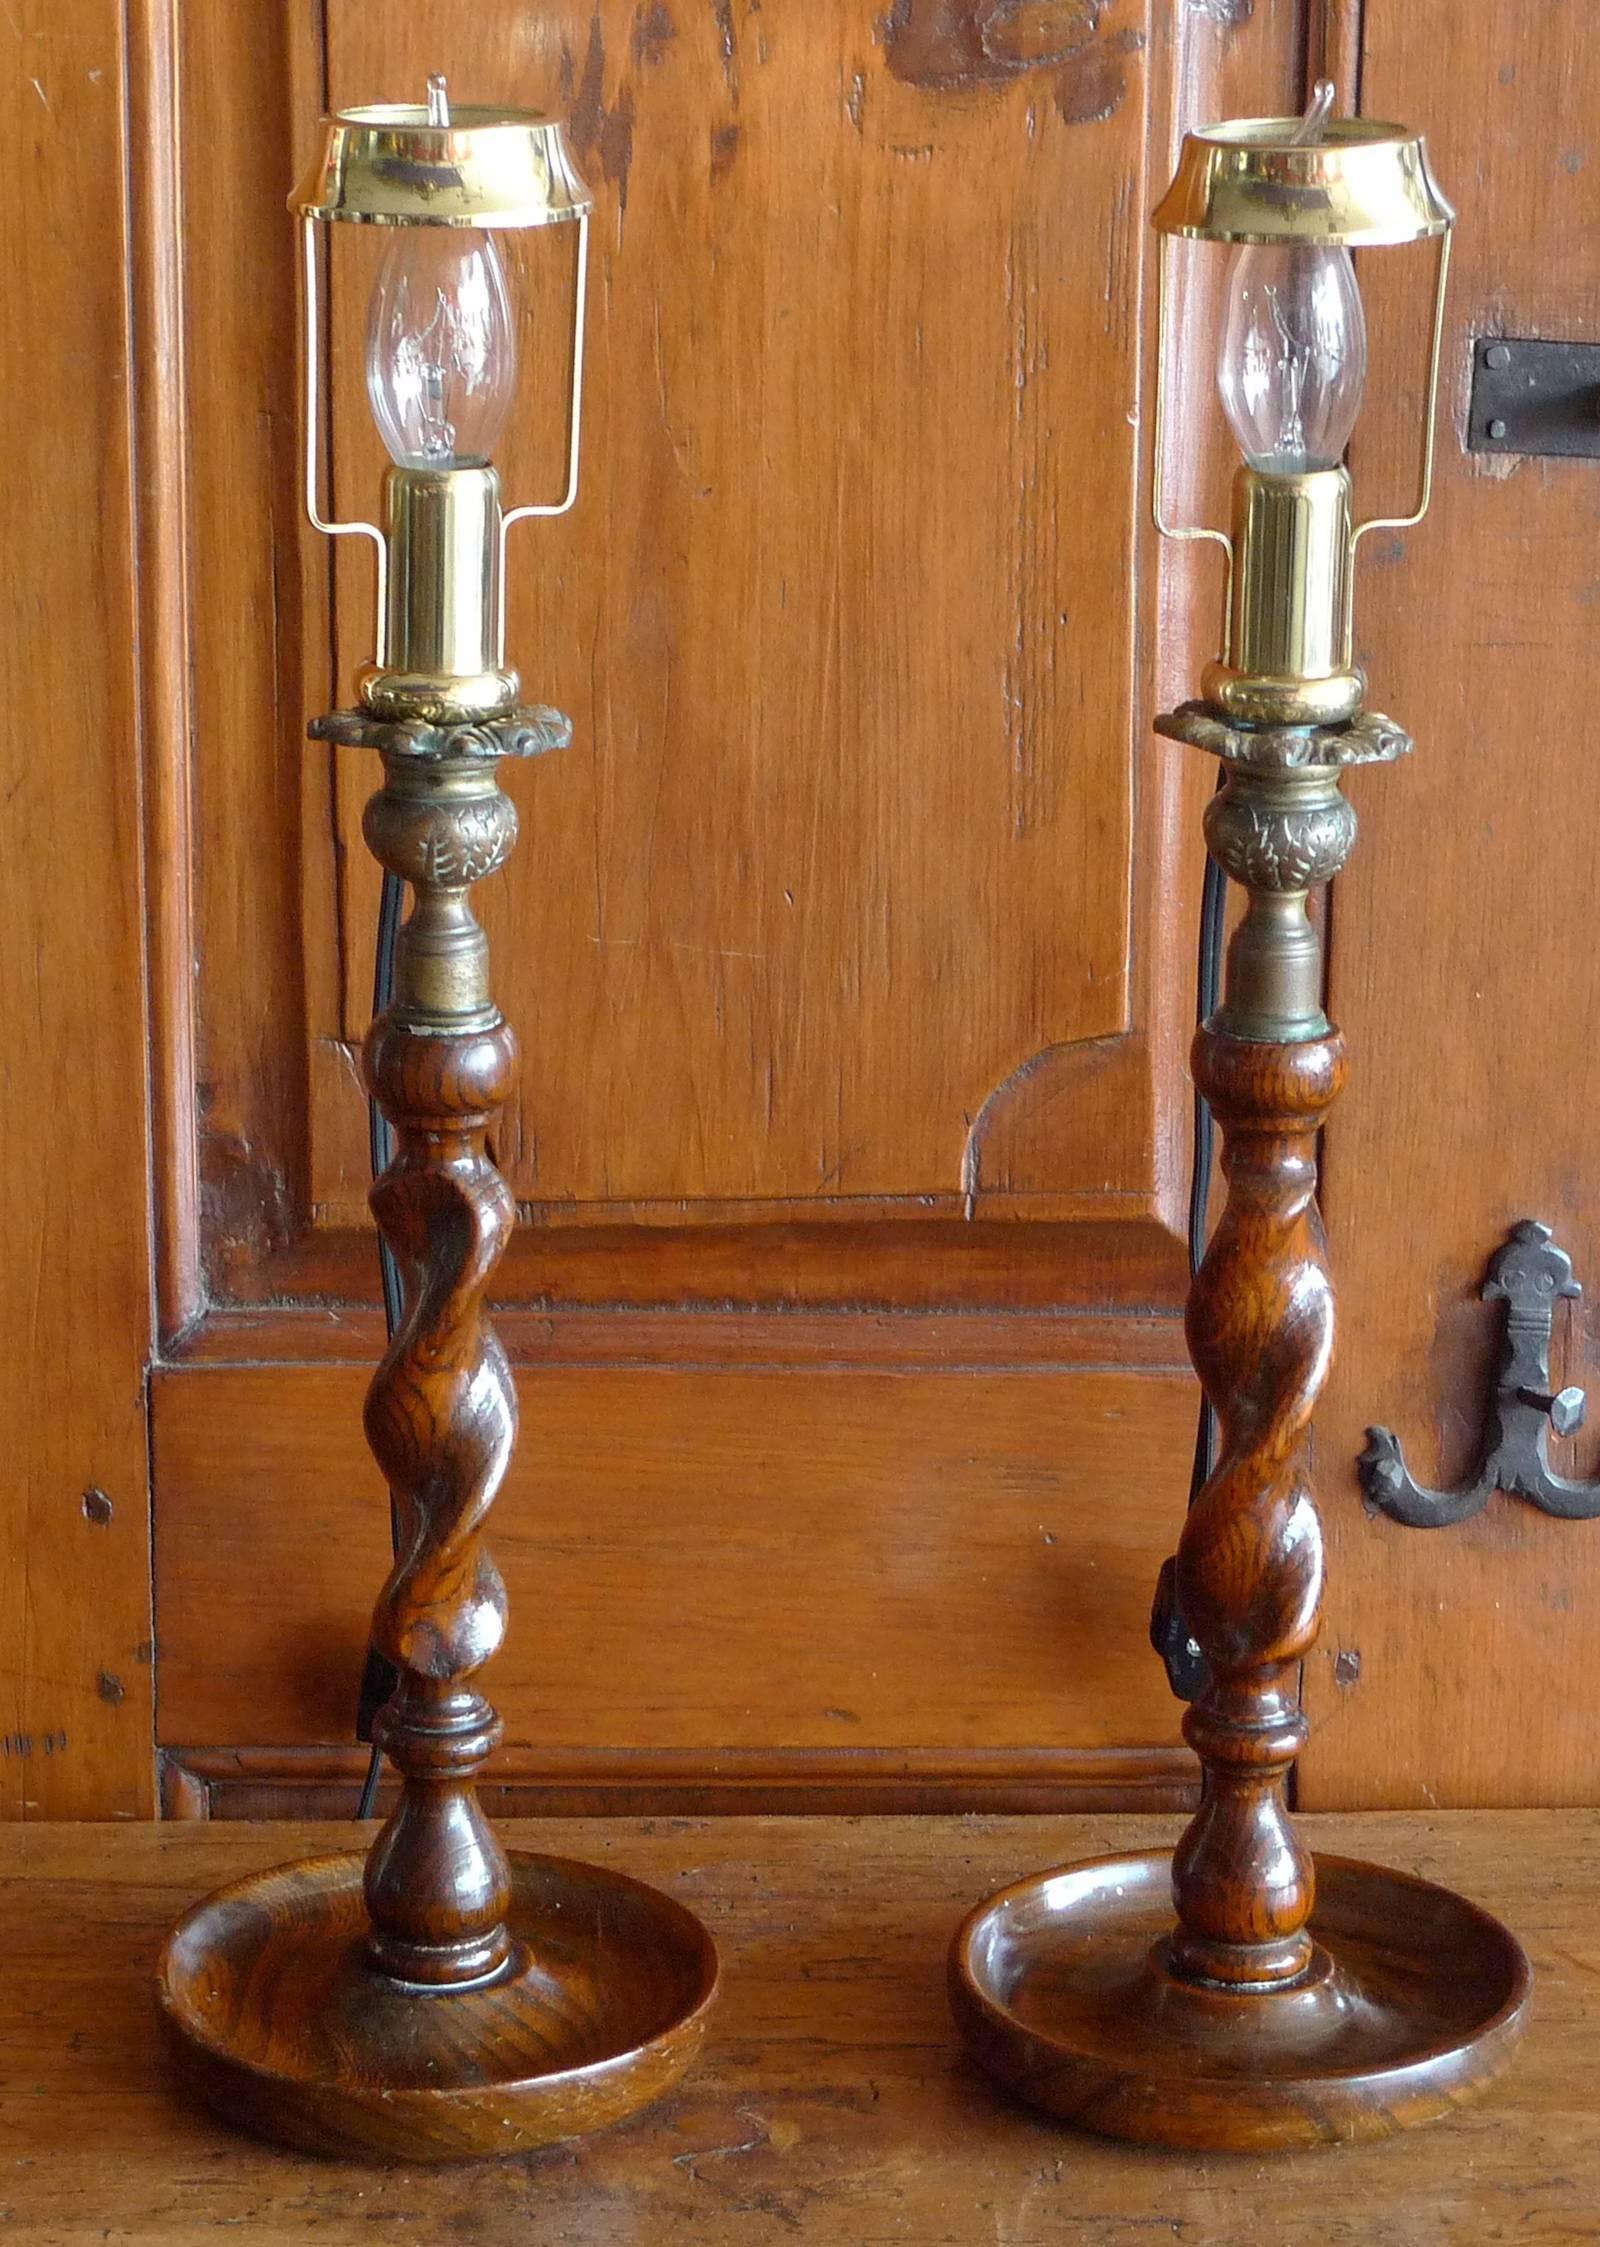 Pair of English 19th century stained walnut barley twist table lamps with brass light holders.